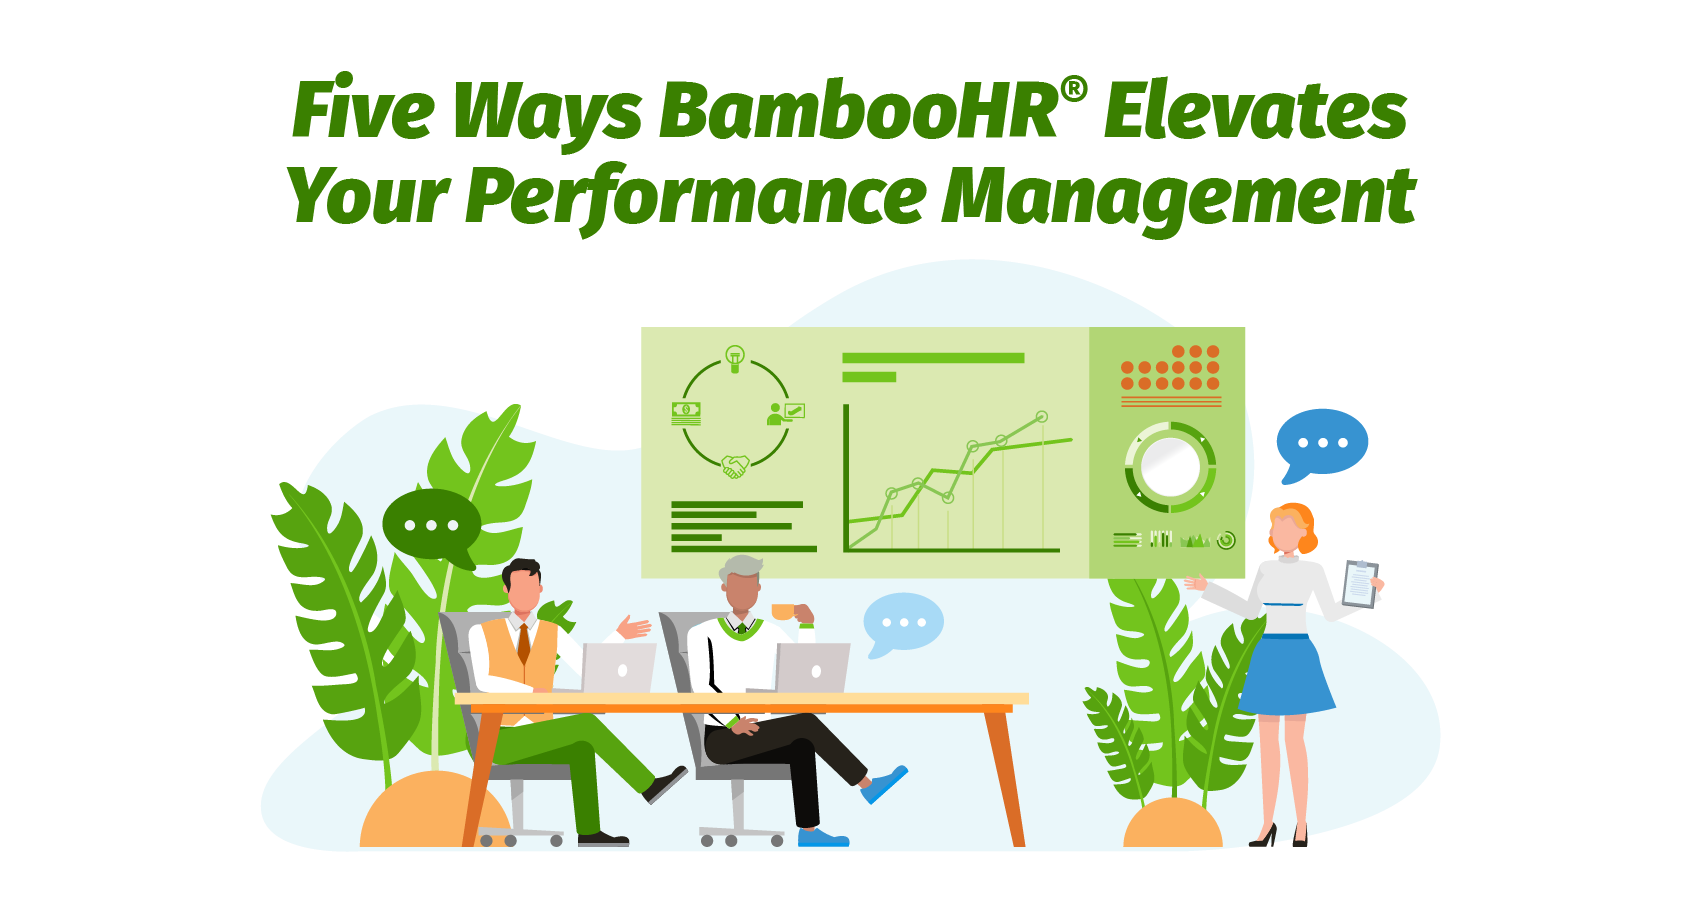 Five Ways BambooHR Elevates Your Performance Management (1)